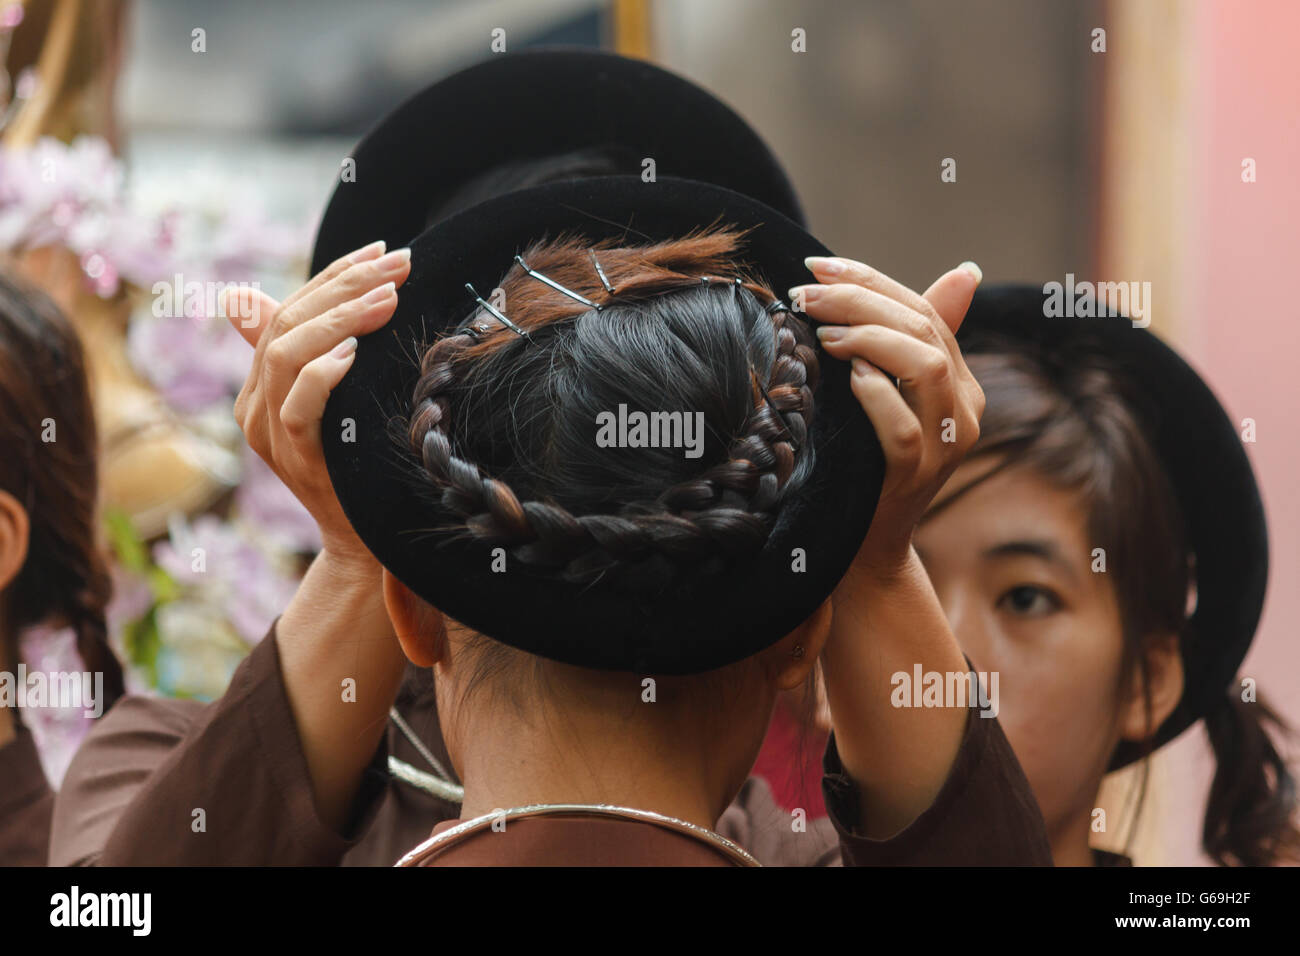 Woman in Ao Dai prepares girls for religious ceremony in Central Vietnam Stock Photo